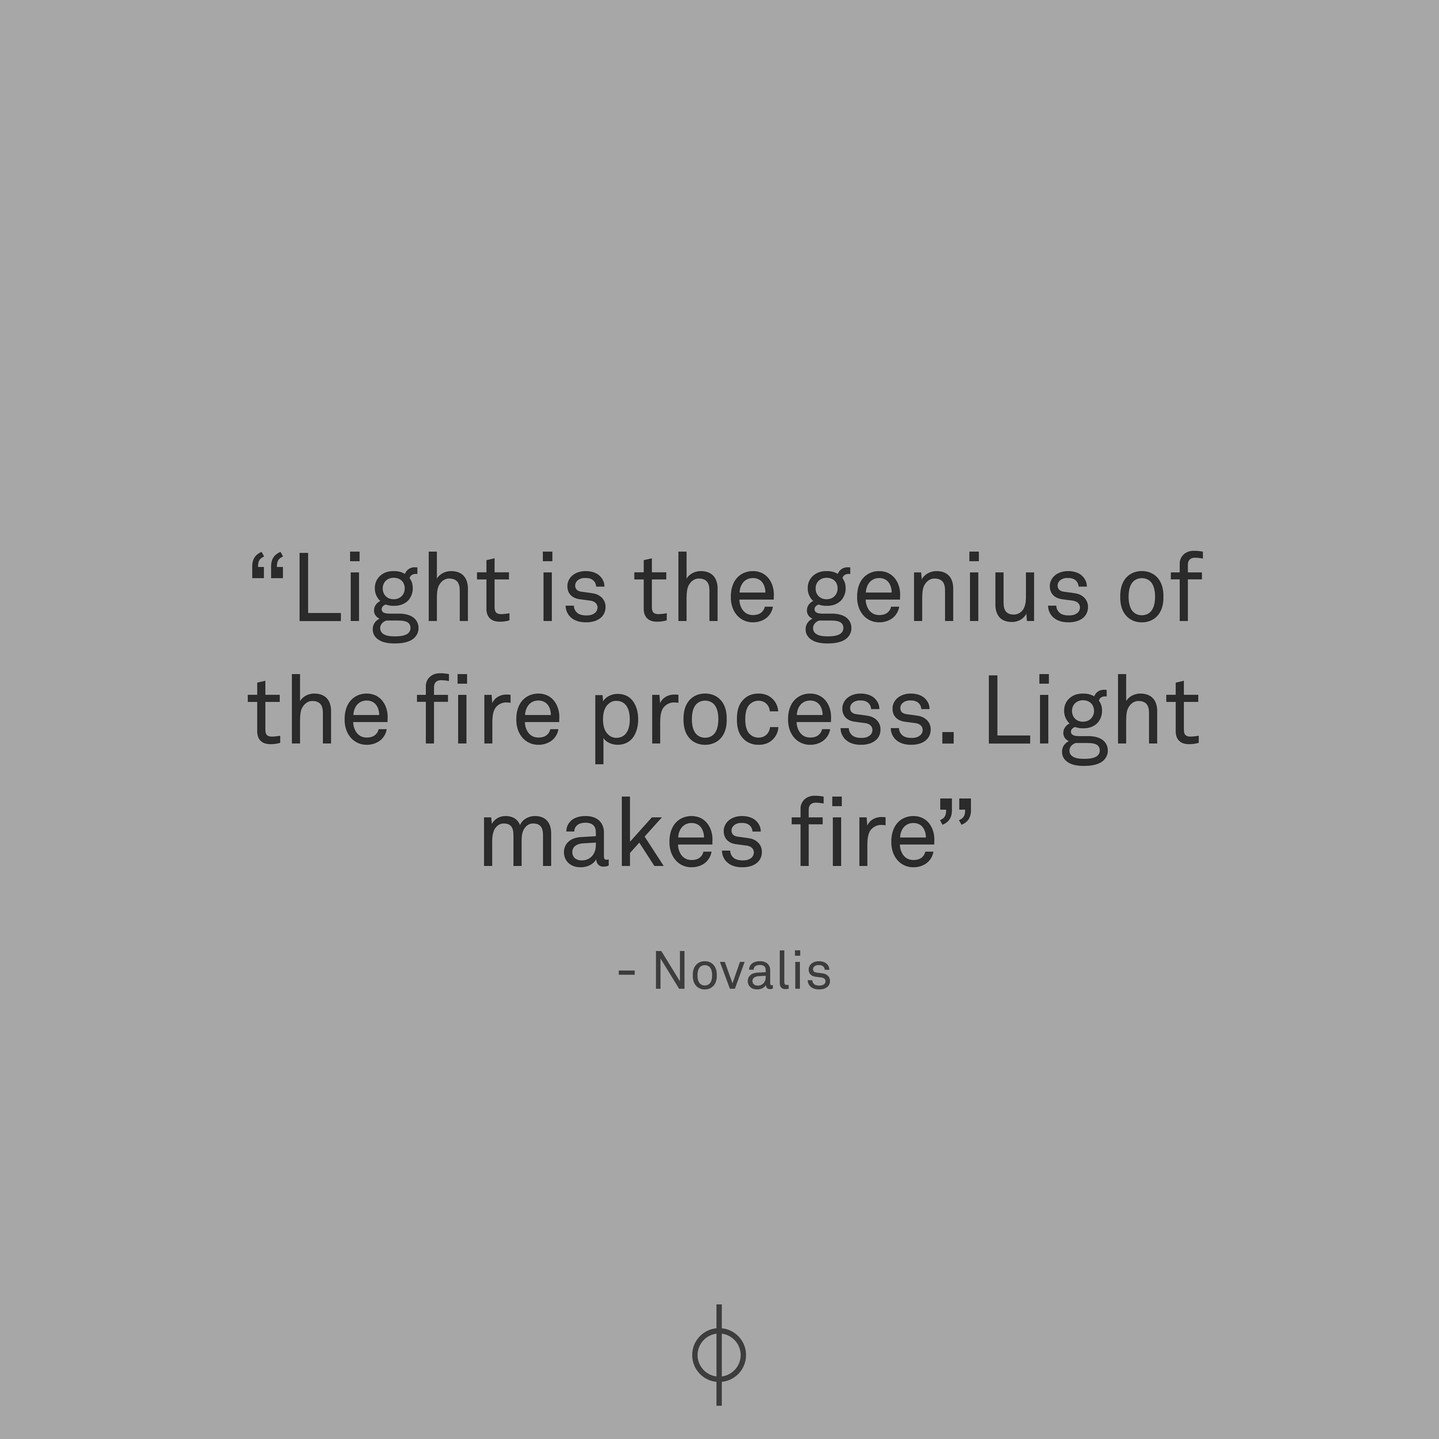 Light is the genius of the fire process. Light makes fire. 

- Novalis